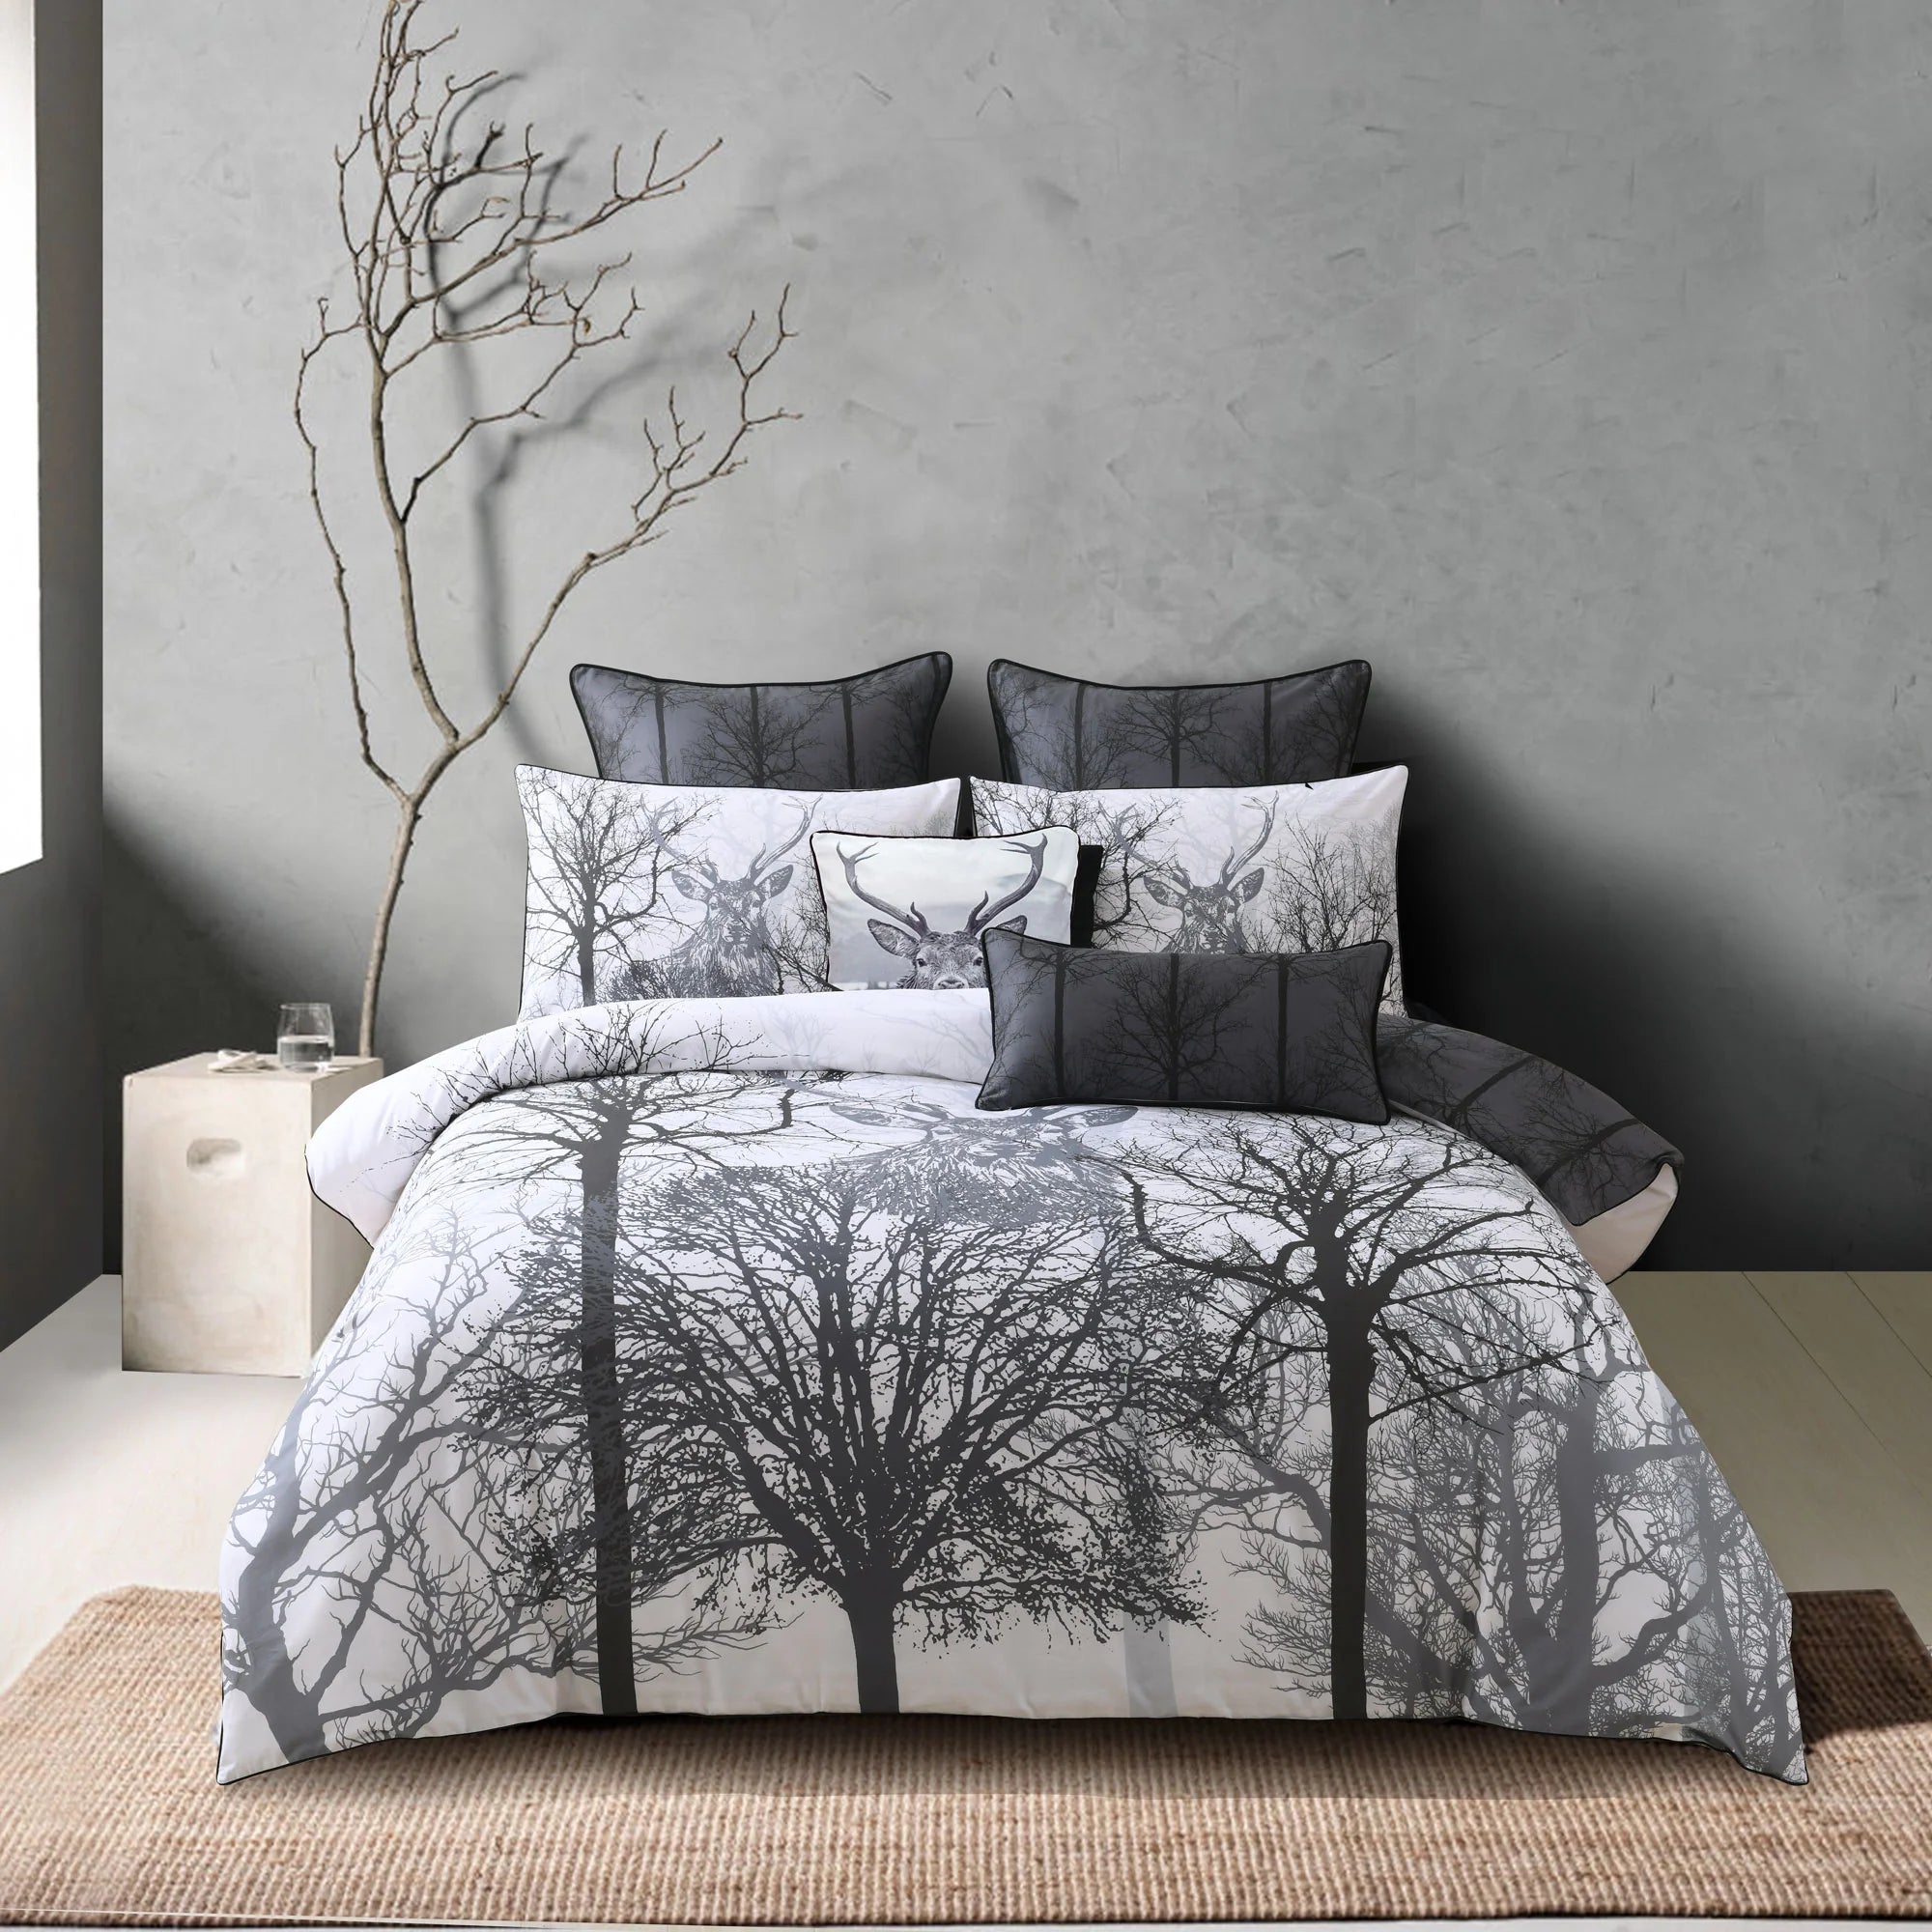 Bring the woods back into your home with this on trend design. The design features an amazing stag head emerging from behind the tall trees creating a statement piece for your bedroom. It is printed on easy care fabric and features a coordinate reverse and black piping.